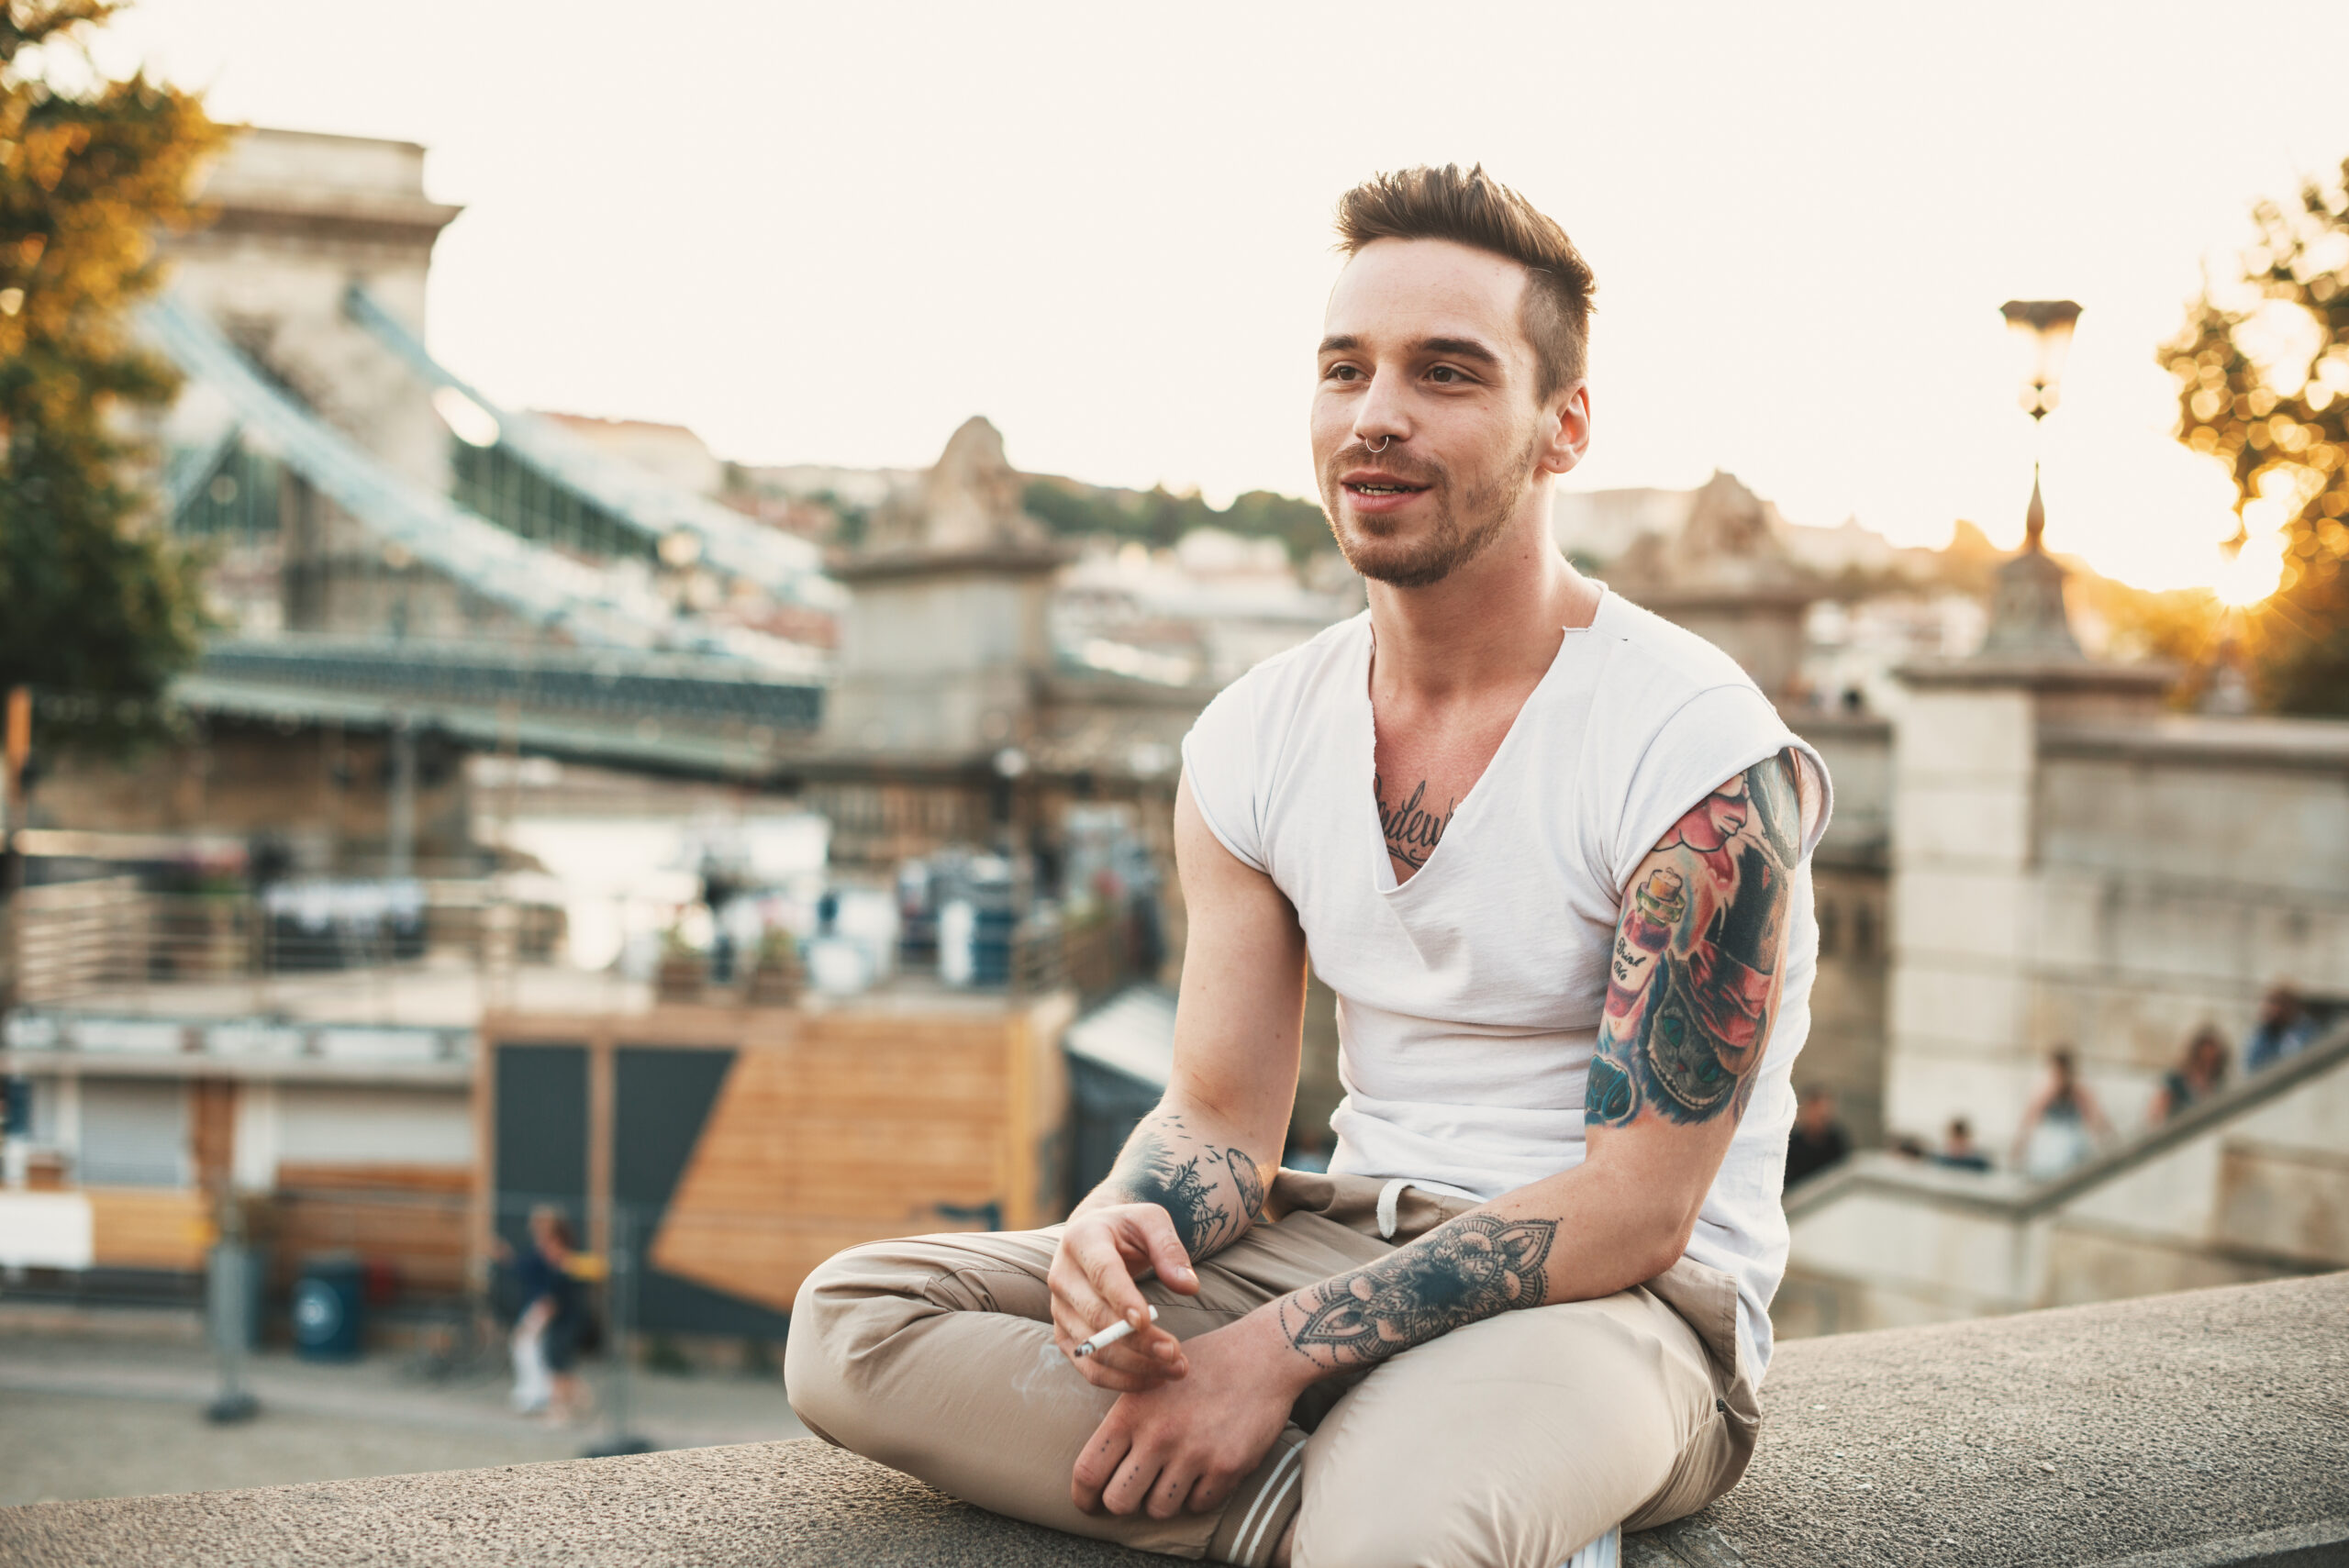 Portrait of handsome modern man with tattoos